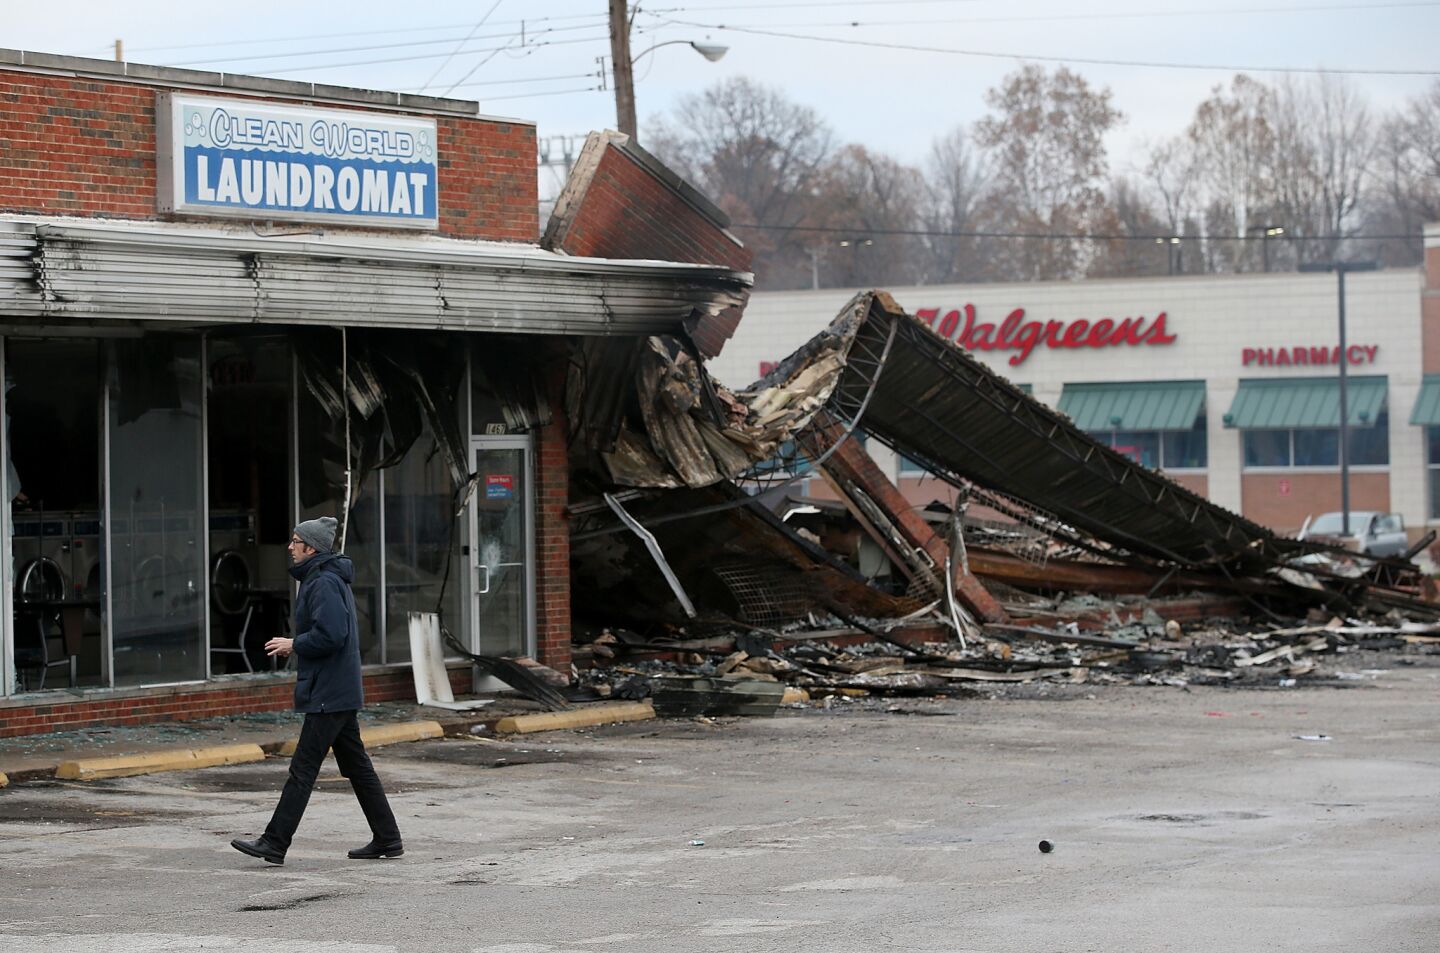 A building that was damaged during a demonstration on Tuesday in Dellwood, Mo.